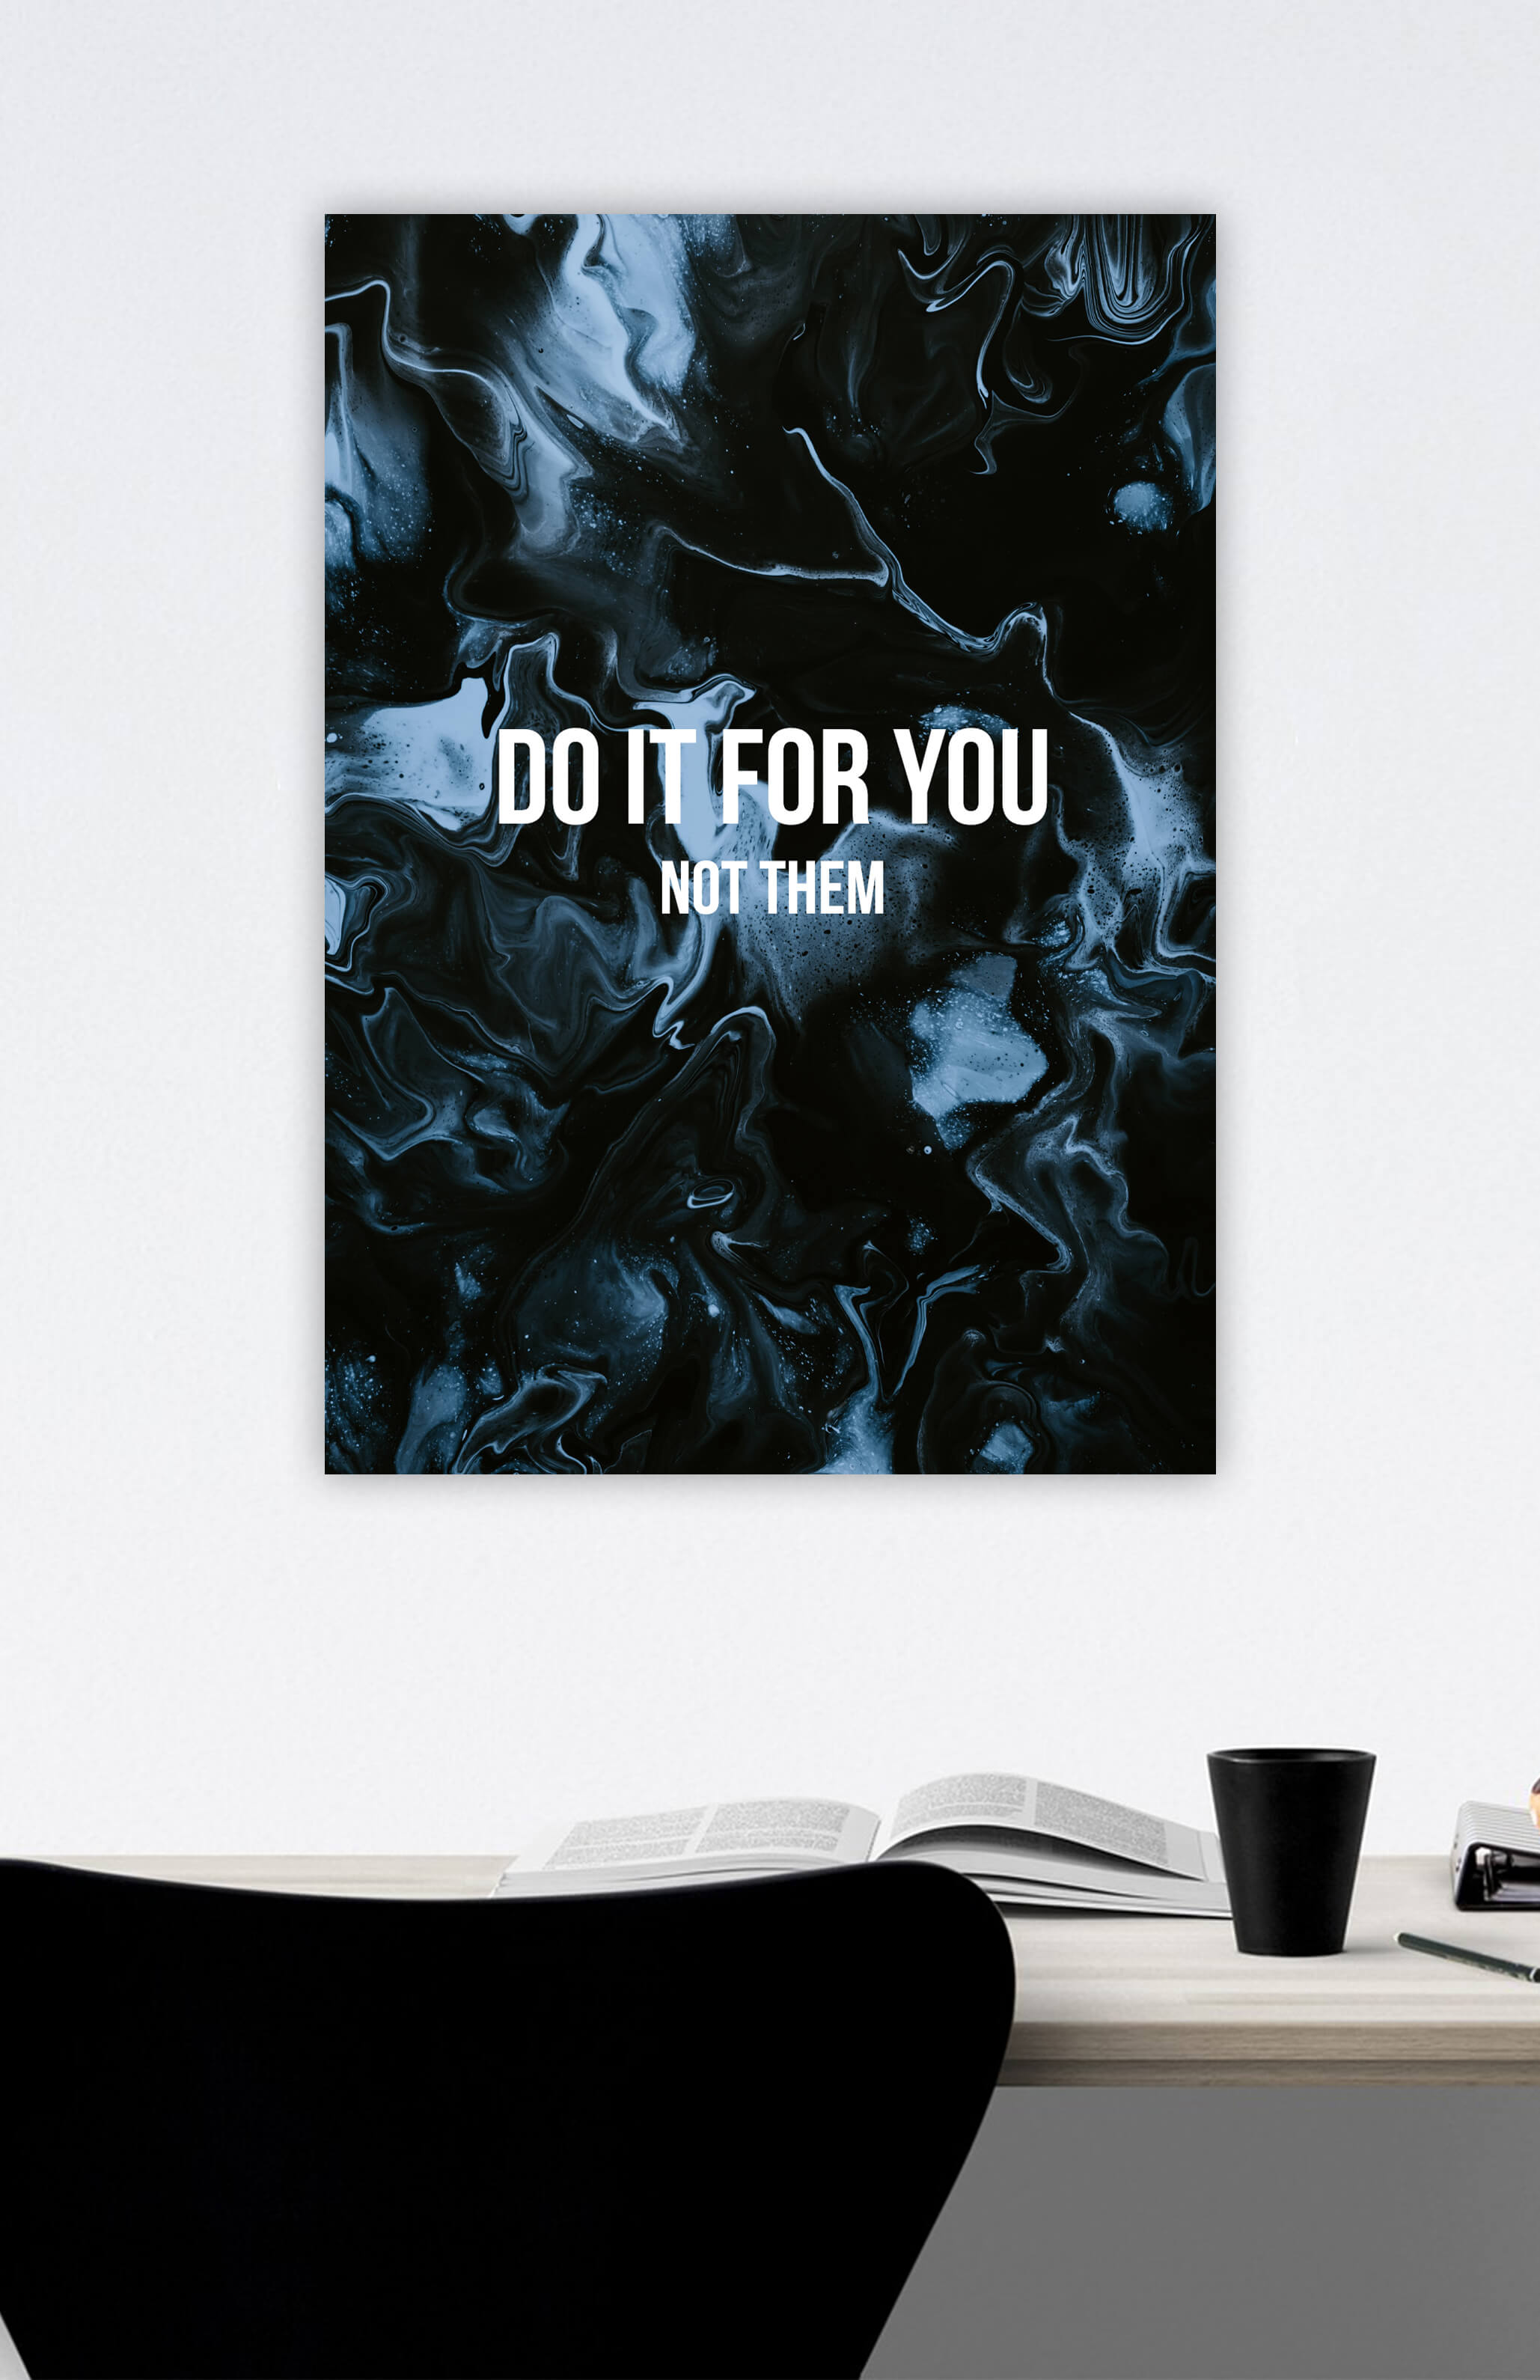 V3 Apparel womens do it for you, Motivational posters, mens inspirational wall artwork and empowering poster quote designs for office, home gym, school, kitchen and living room.